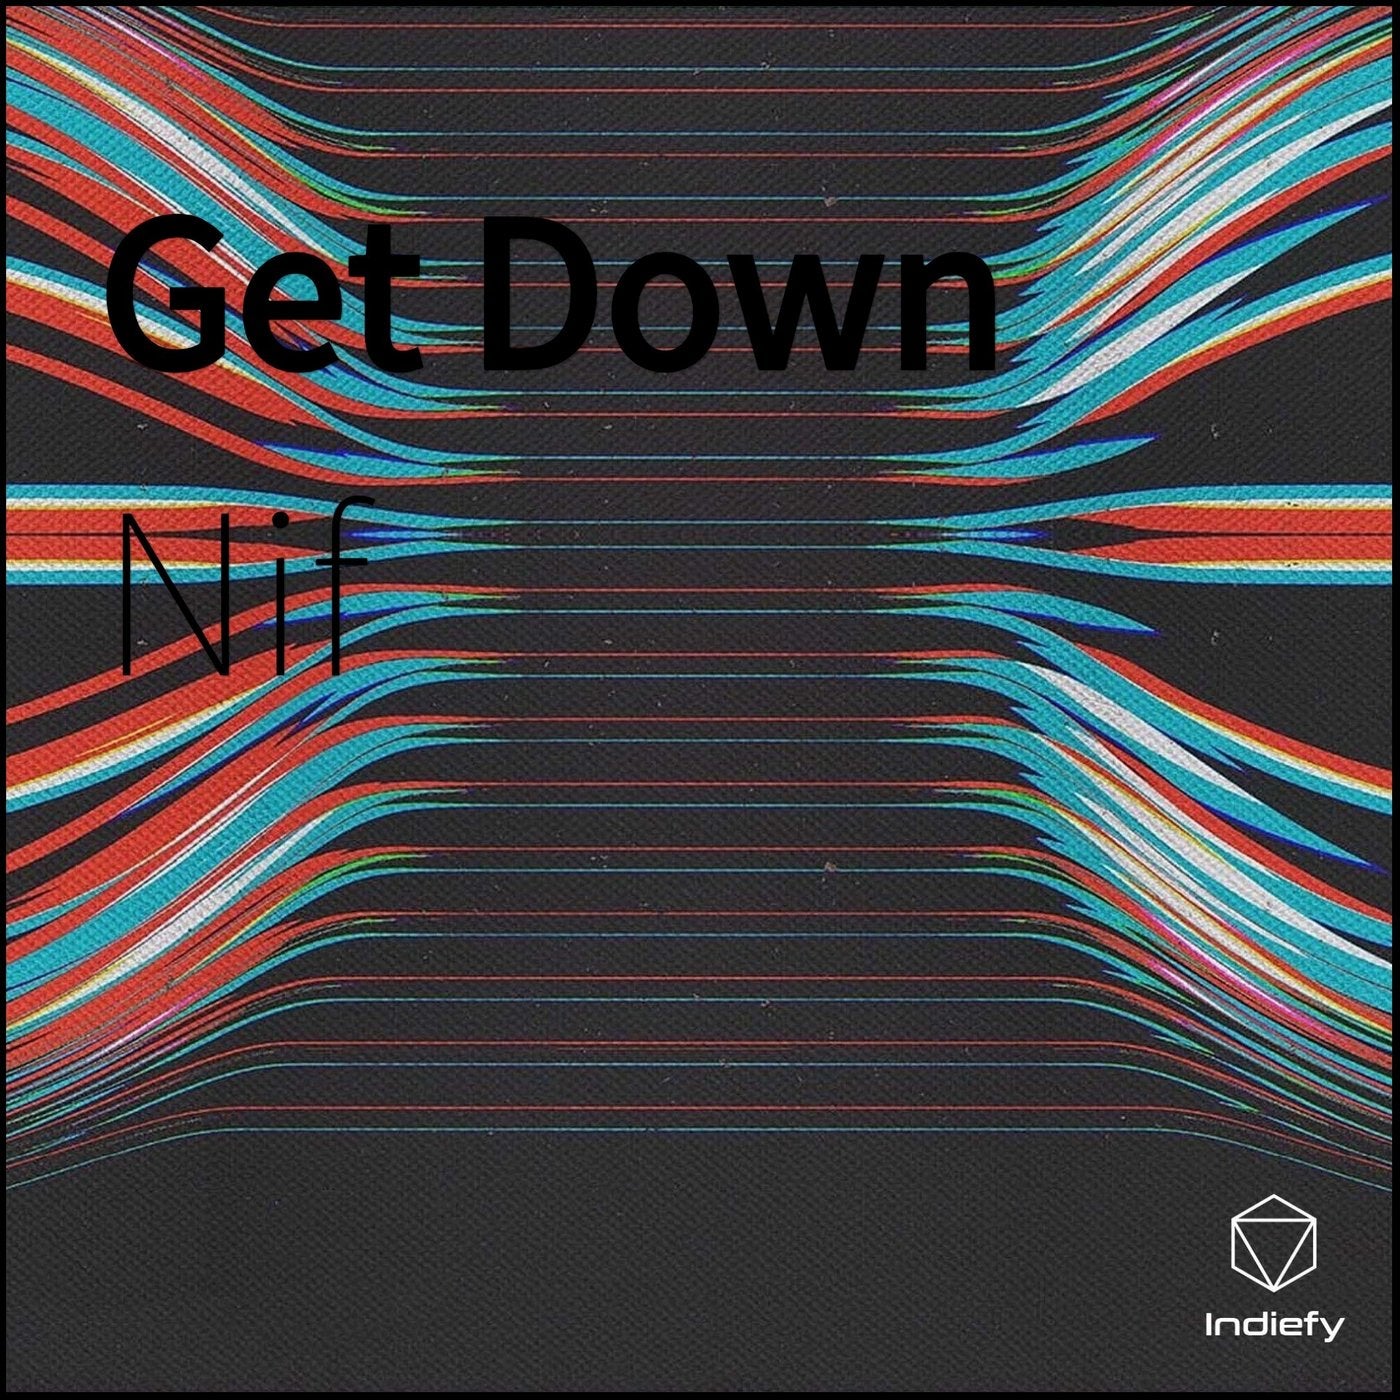 Get Down